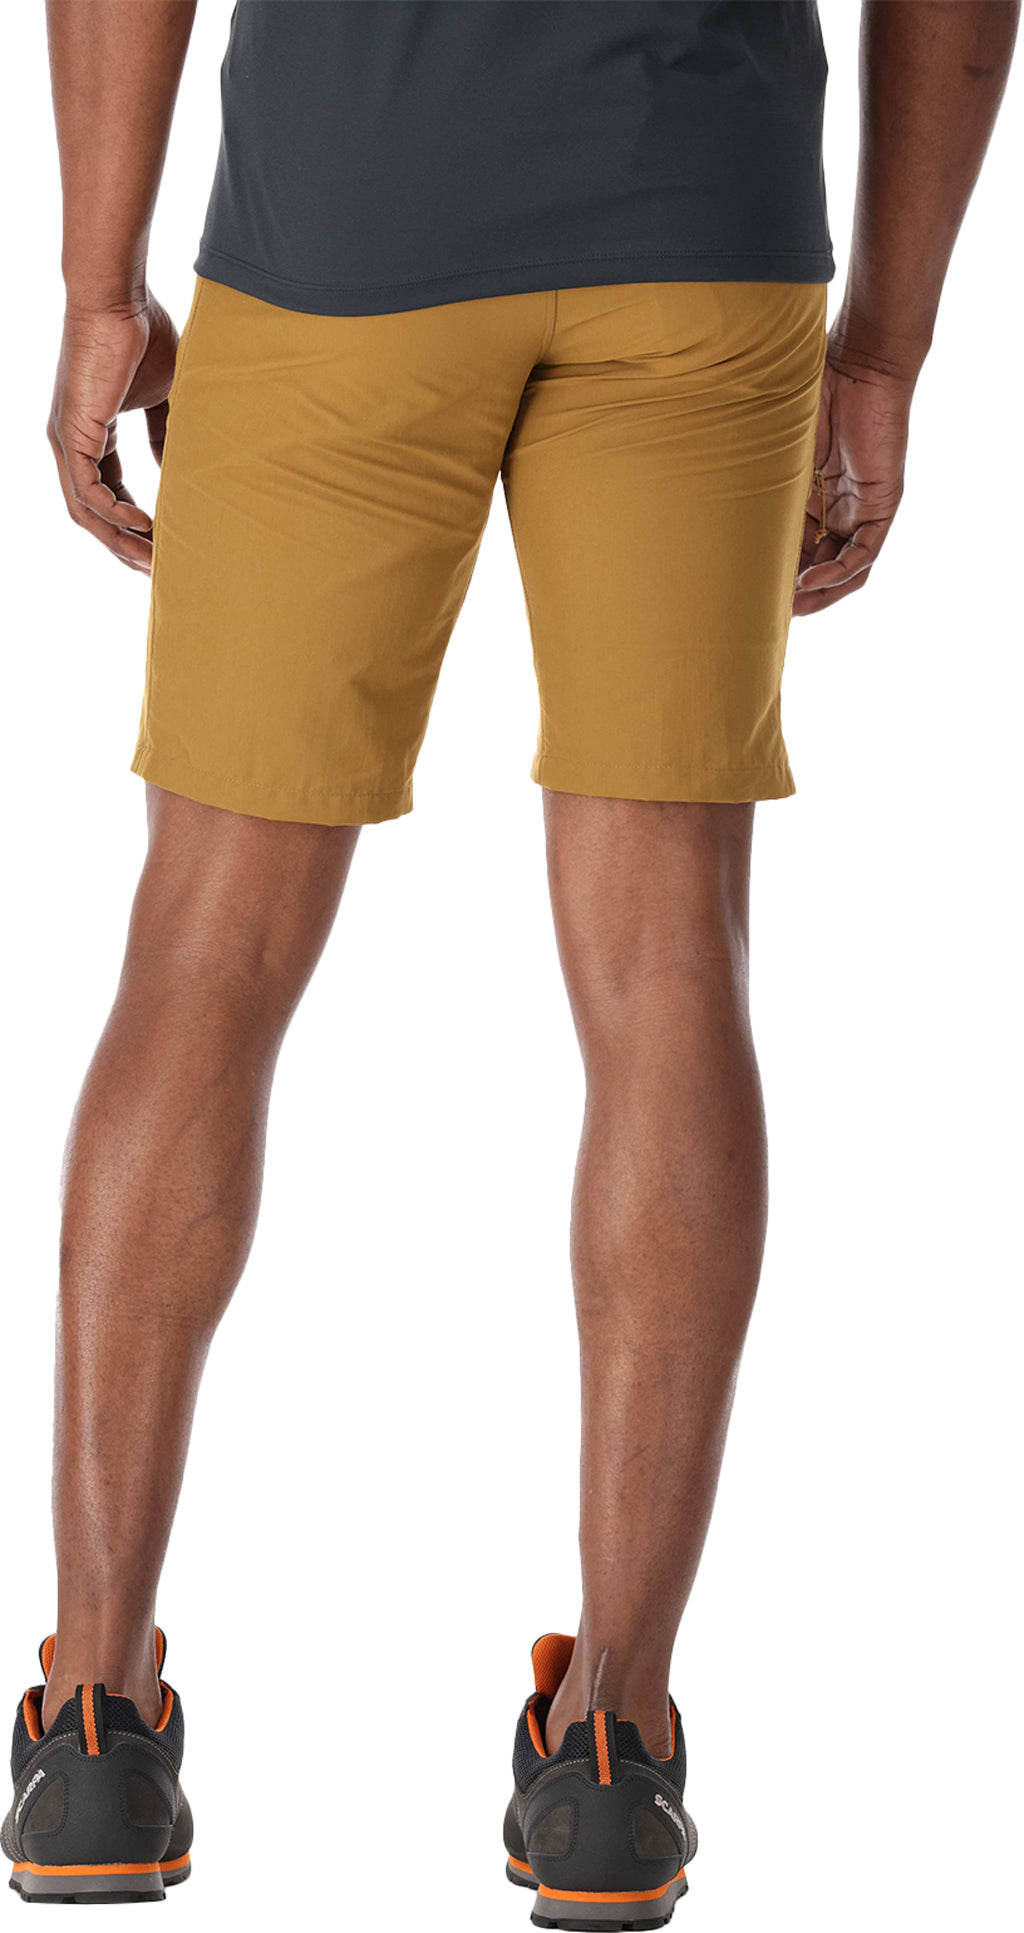 Rab Talus Ultra Shorts, 5 Inseam - Mens, FREE SHIPPING in Canada